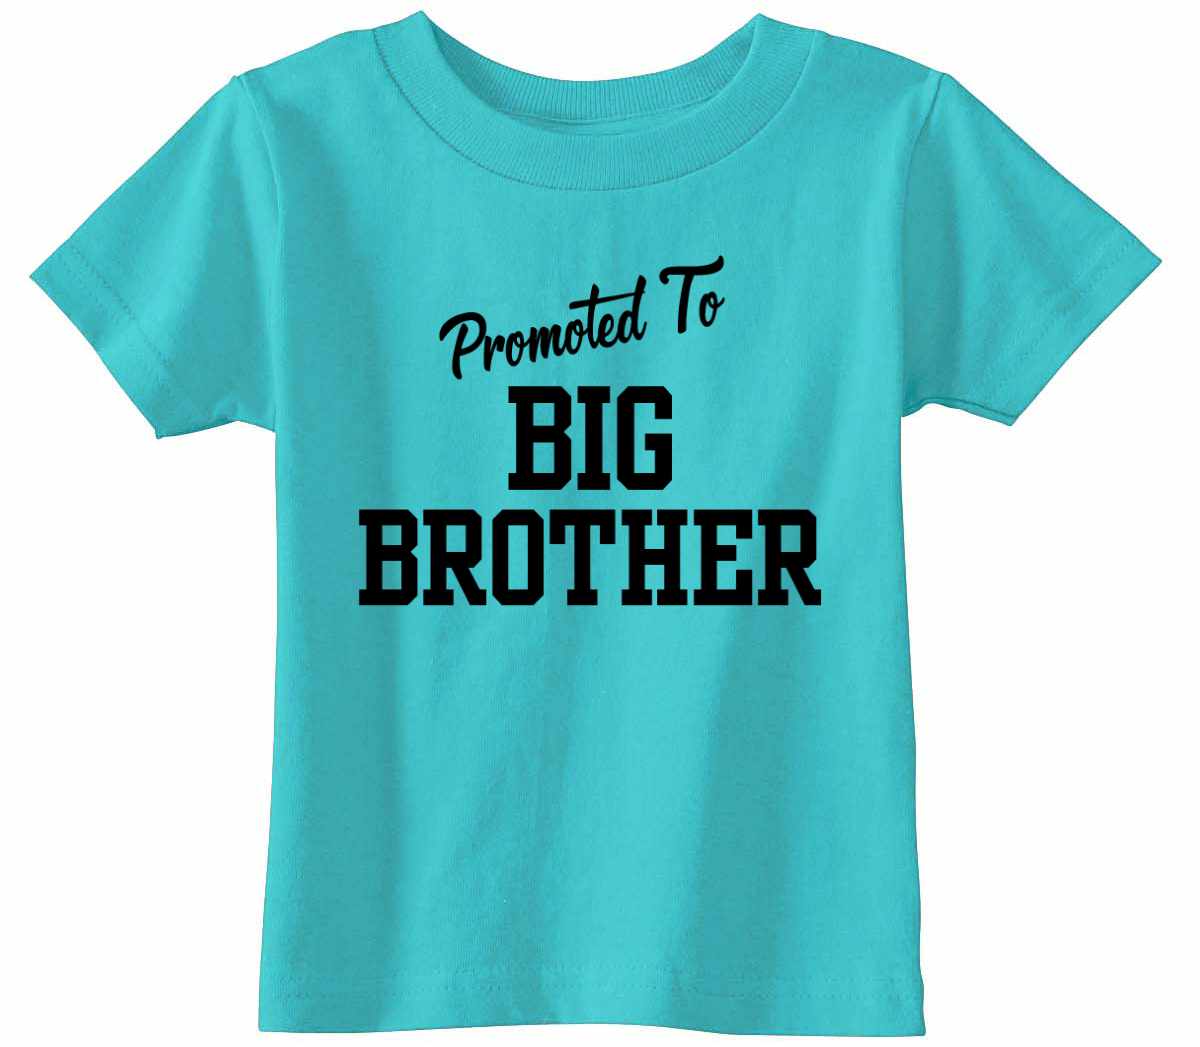 Promoted To Big Brother on Infant-Toddler T-Shirt (#1232-7)